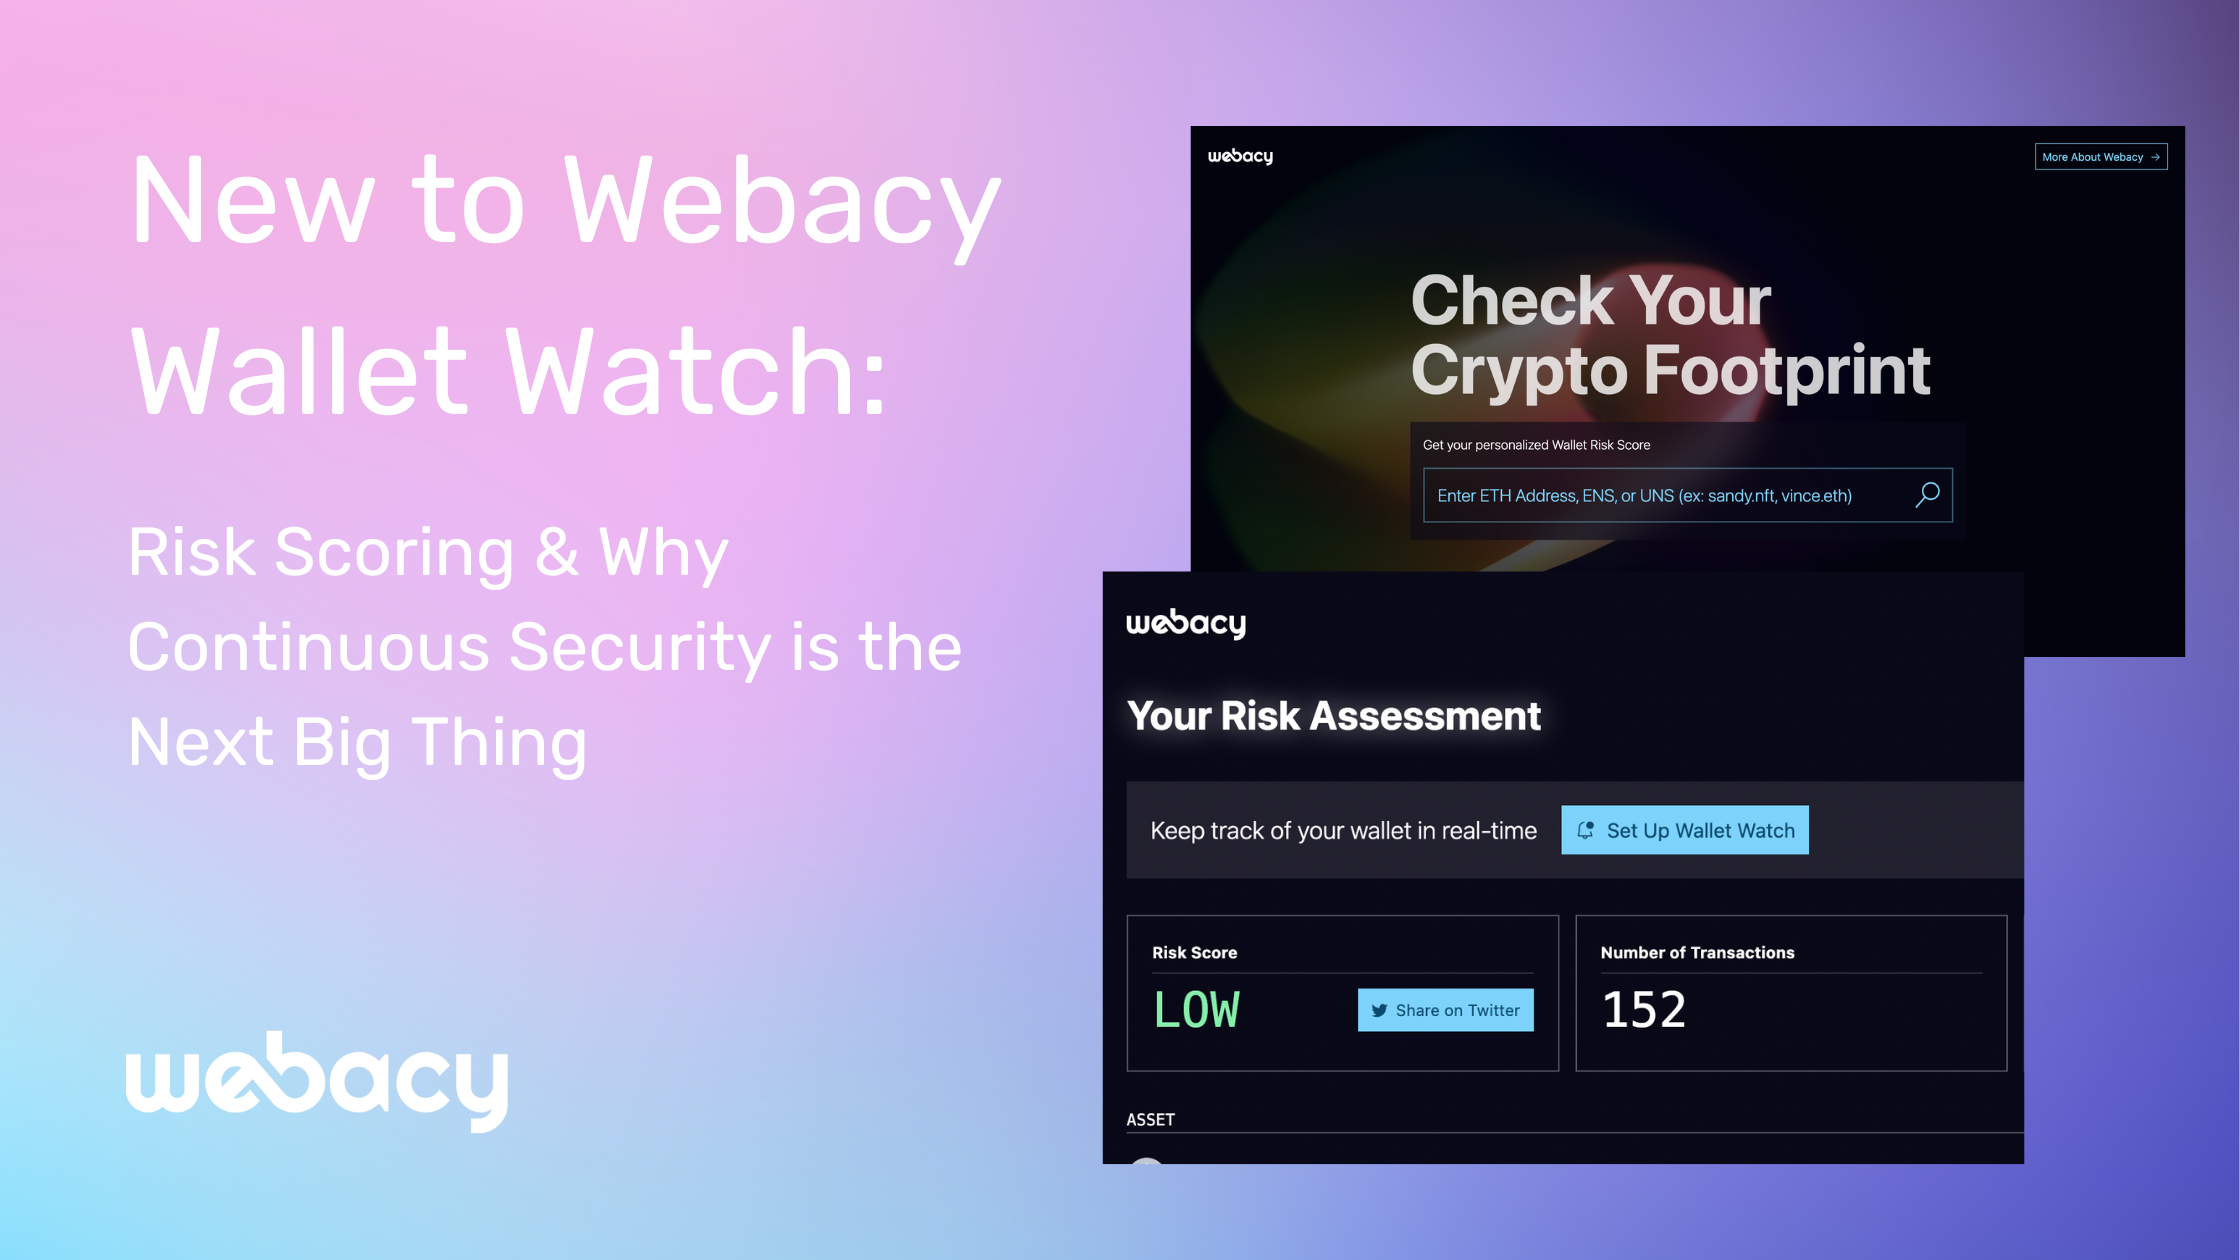 New to Webacy Wallet Watch: Risk Scoring & Why Continuous Security is the Next Big Thing